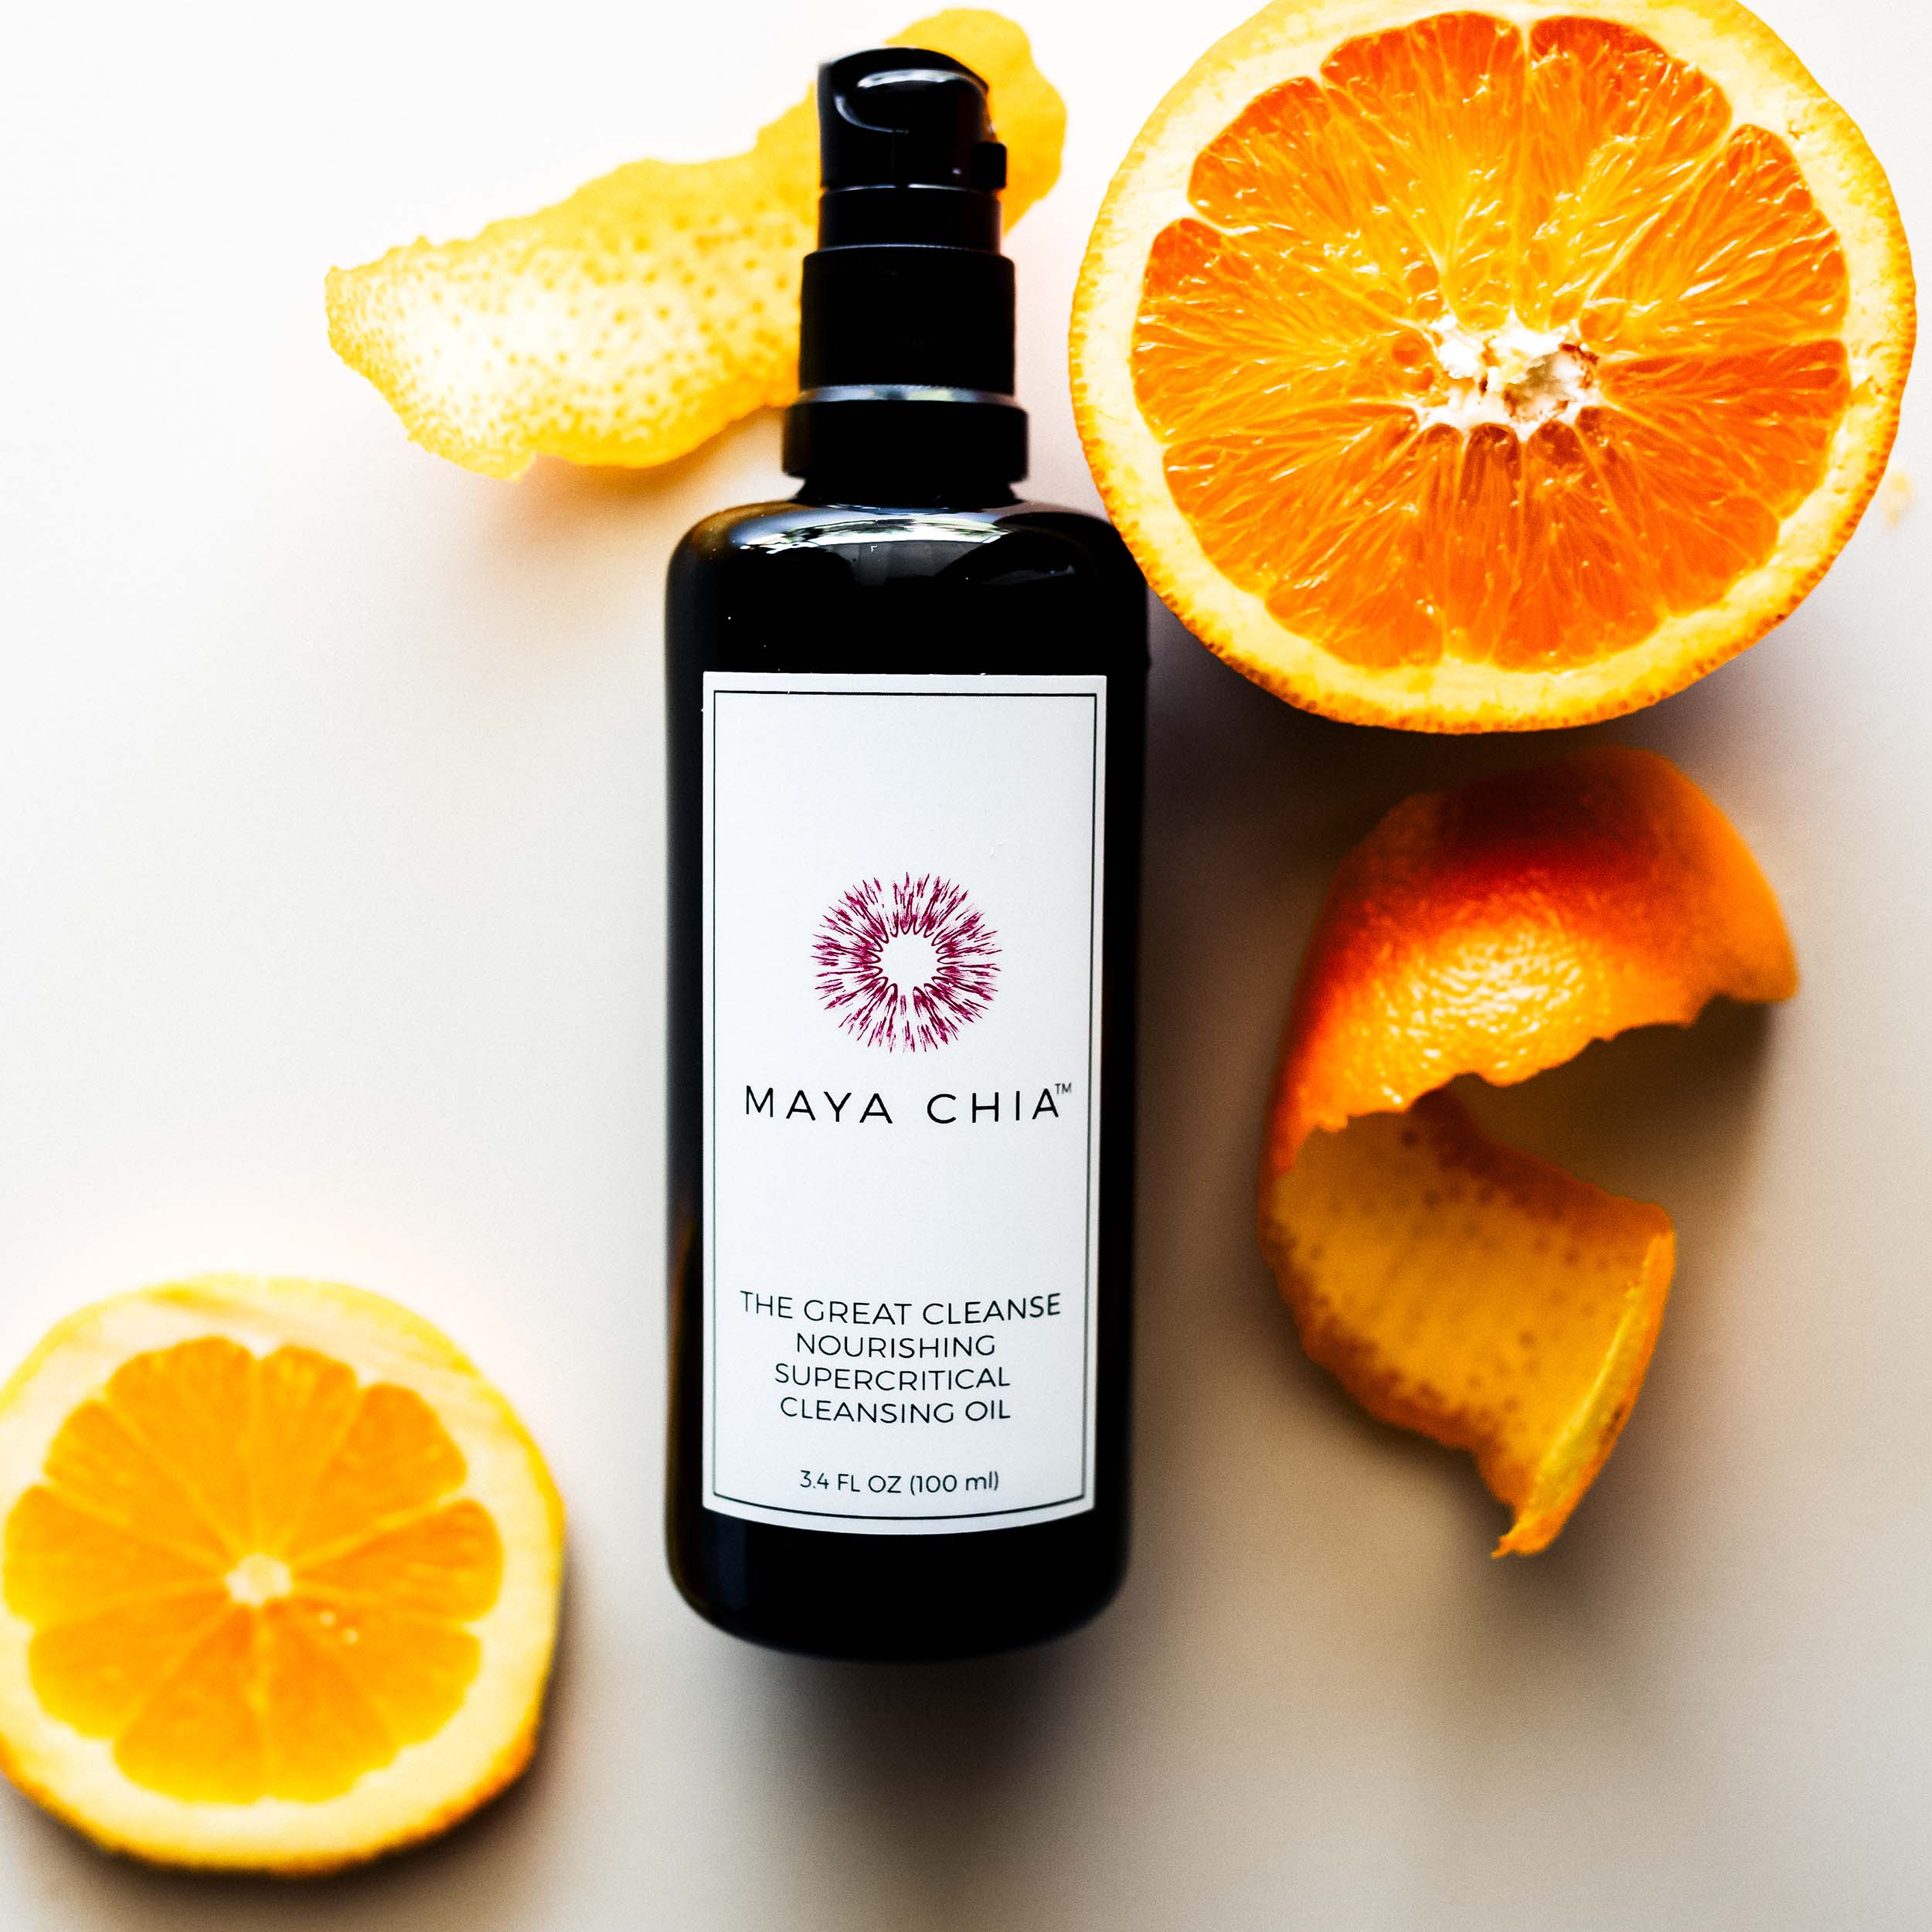 The Great Cleanse Cleansing Oil